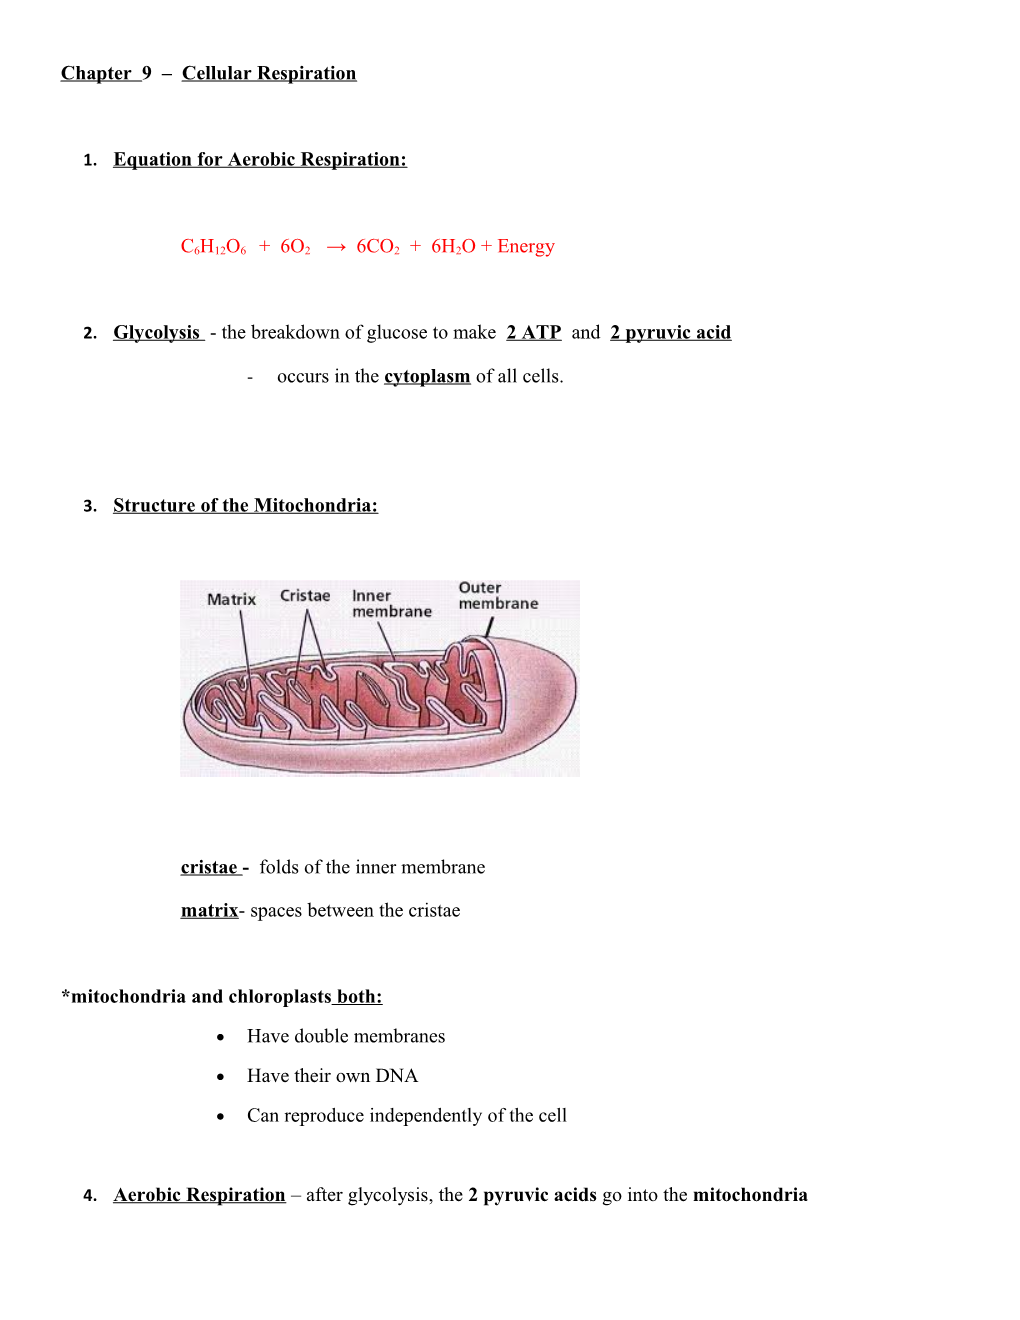 Chapter 9 Cellular Respiration s1